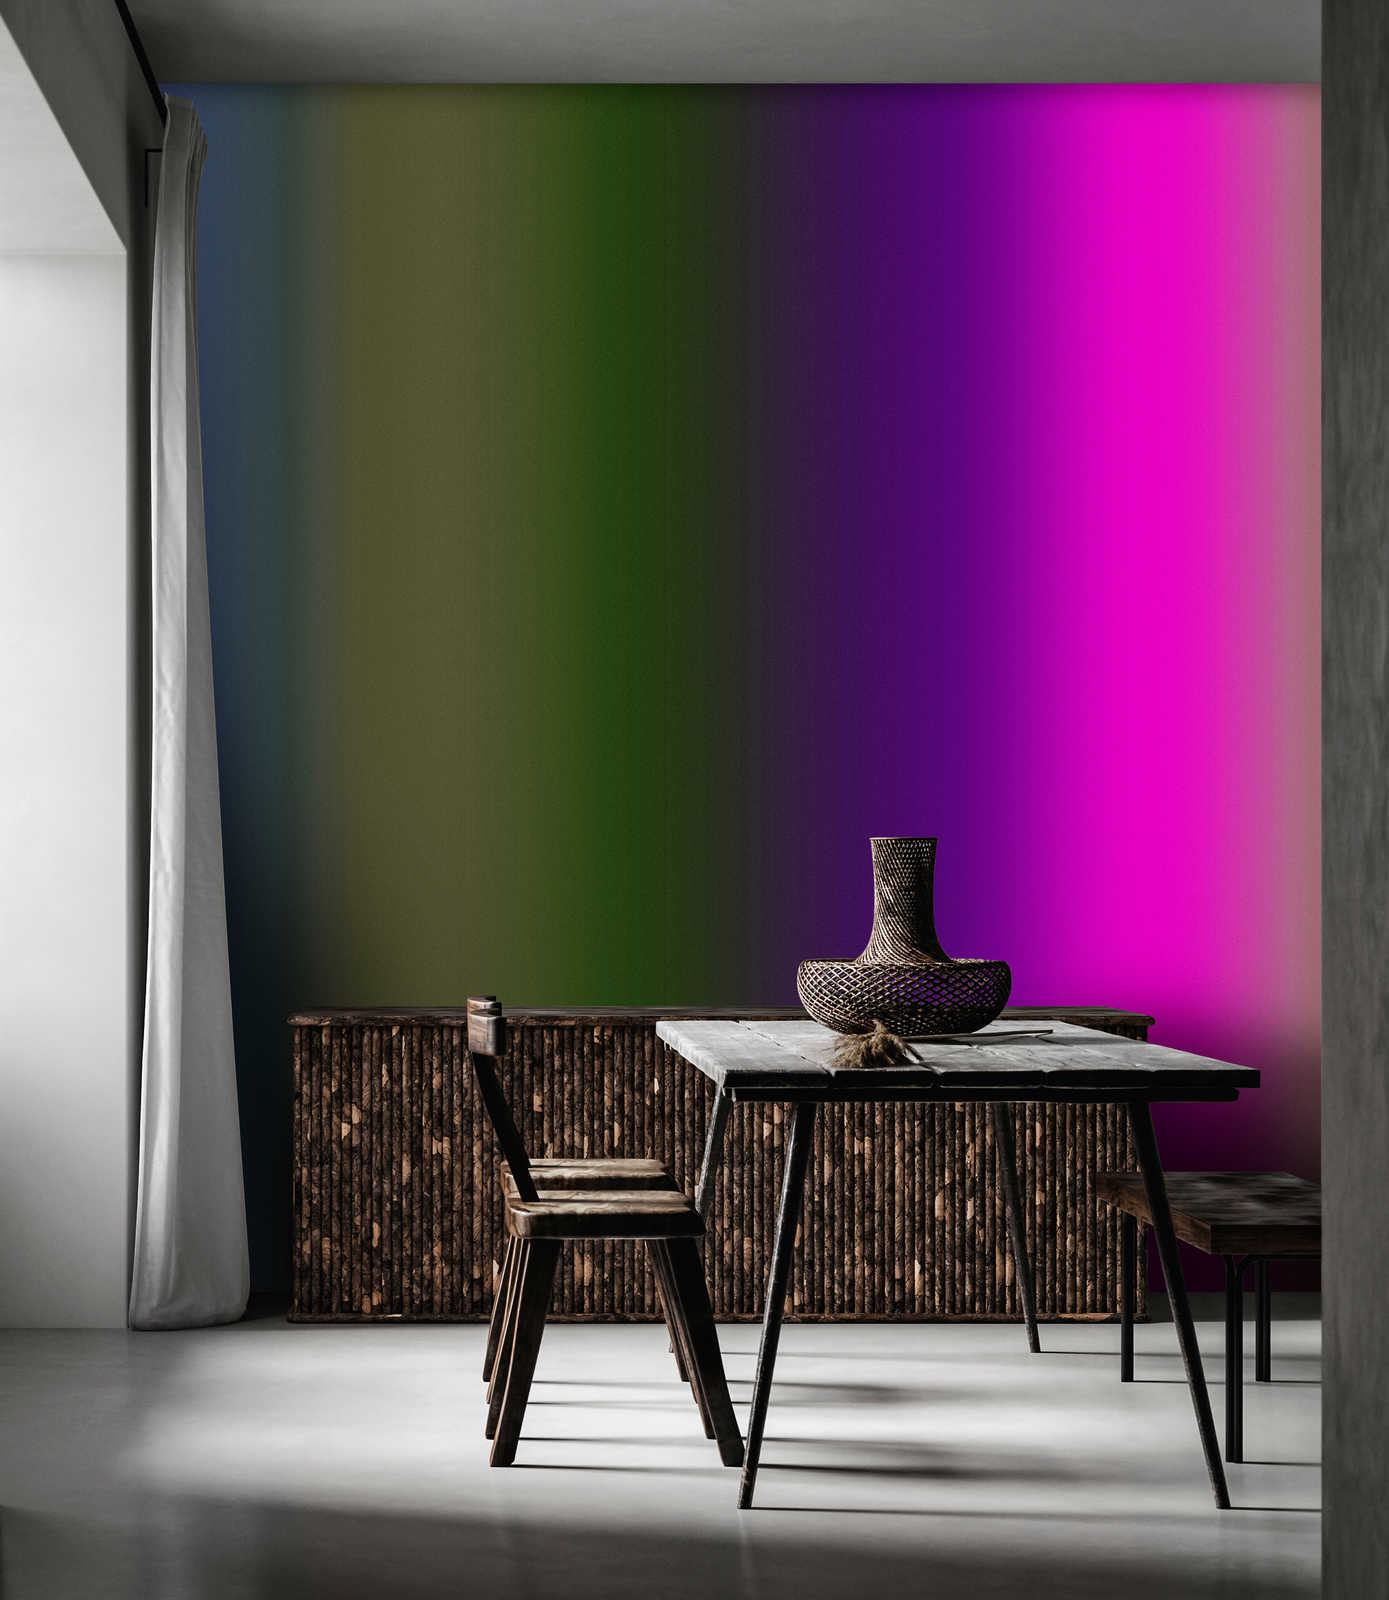             Over the Rainbow 3 - photo wallpaper variegated colour spectrum with neon pink
        